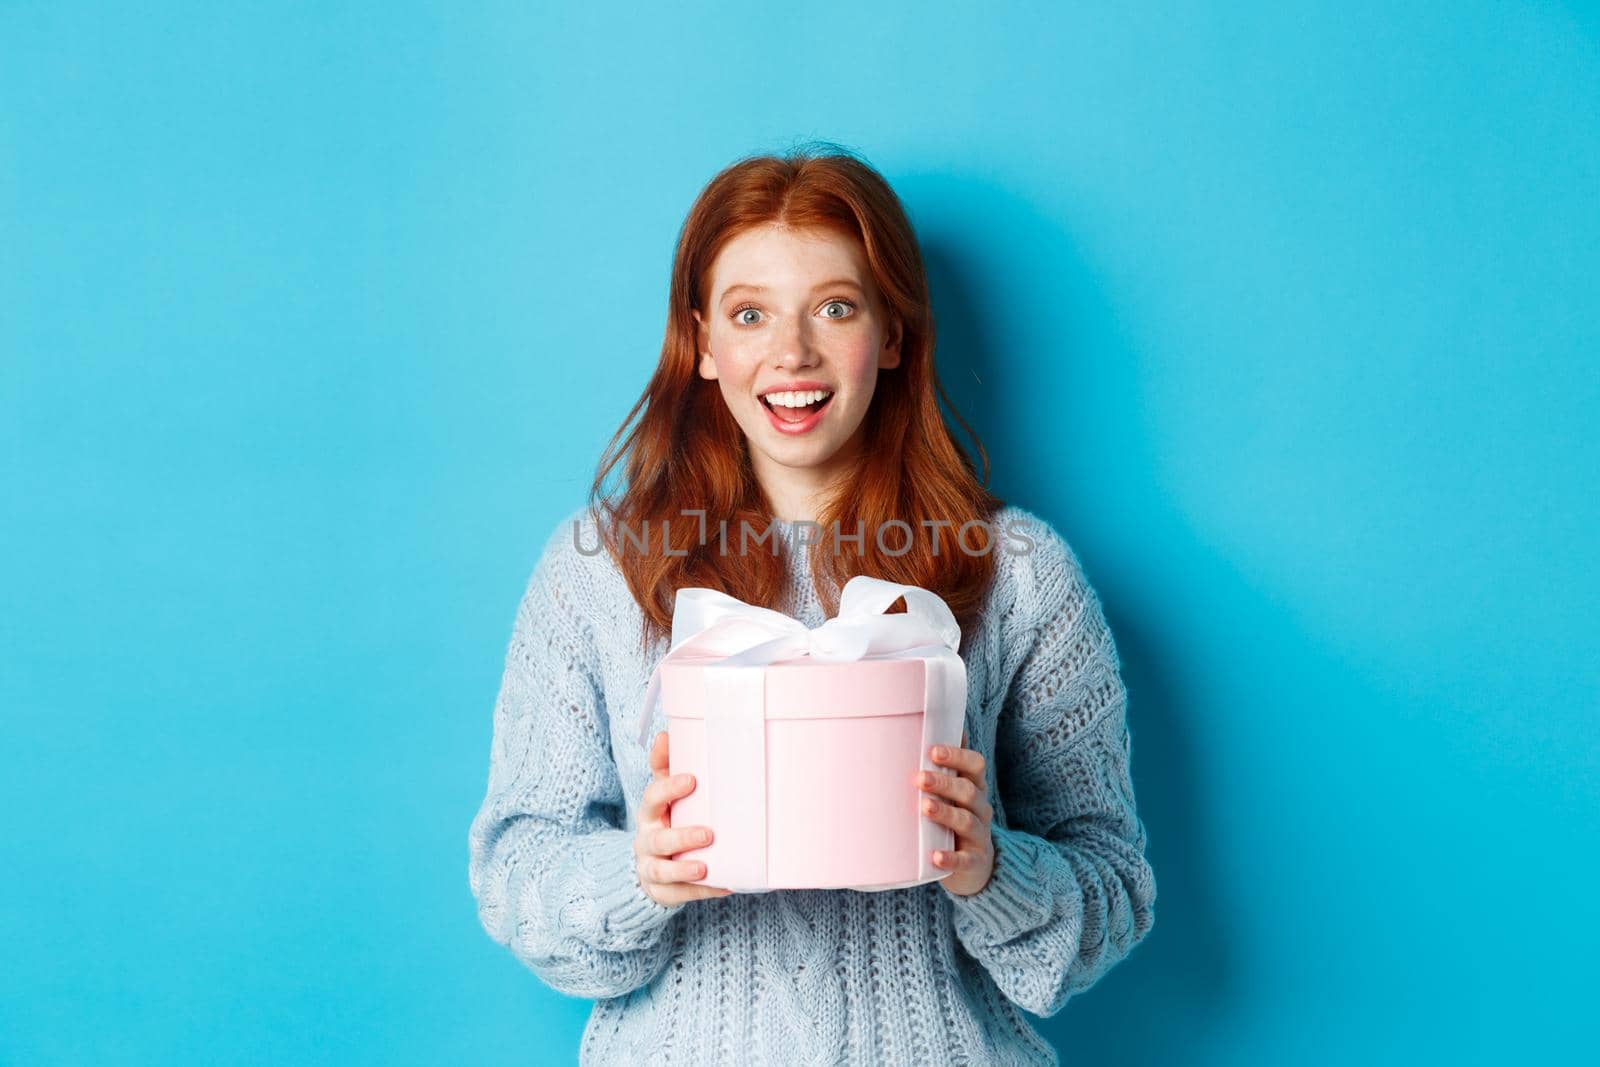 Surprised redhead girl receiving valentines gift, holding box with present and staring at camera amazed, wearing sweater, standing over blue background.